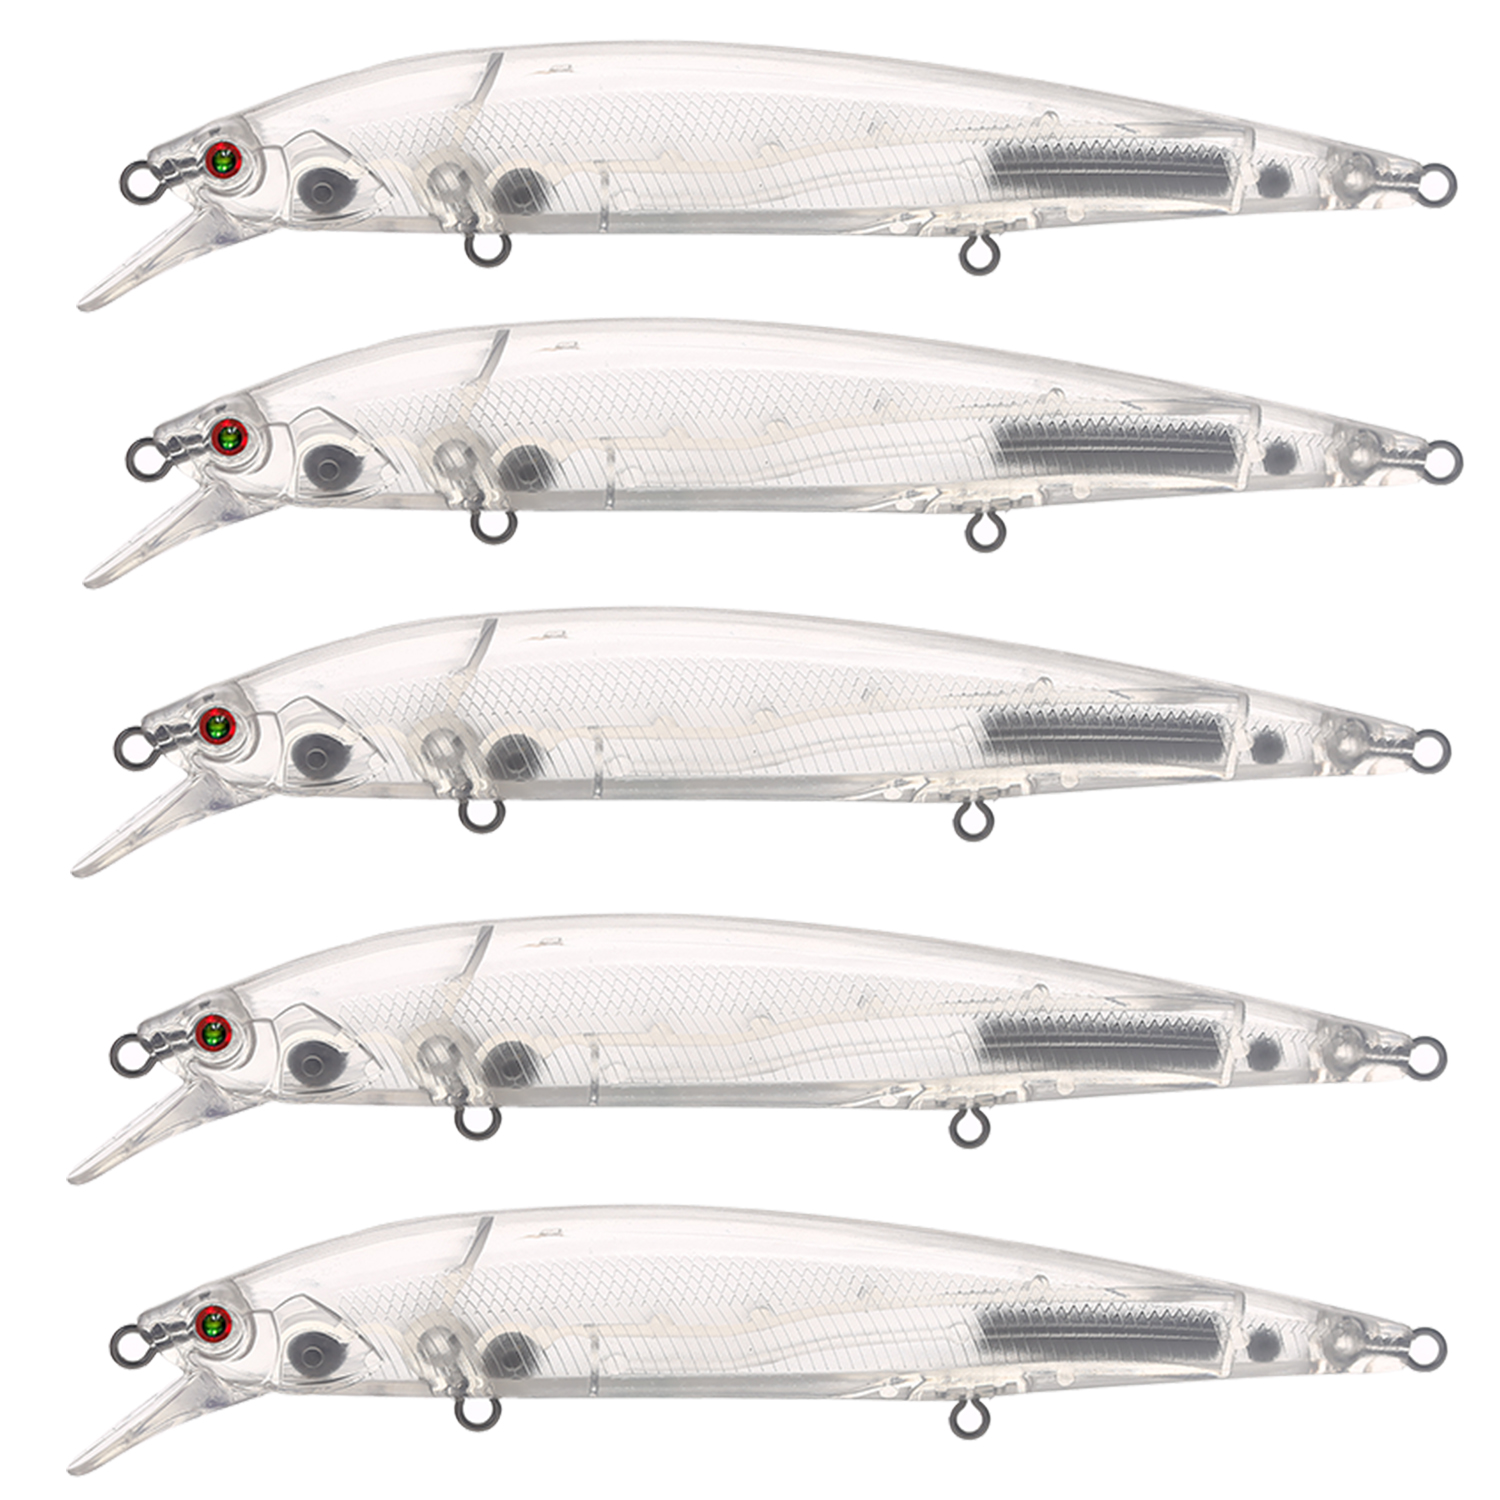 Wholesale Unpainted Fishing Lures,Lure Blanks Large Minnow Artificial Bass Lures,Assorted Hard Plastic Square Crankbait Blank Lure Baits 140mm/15.8g